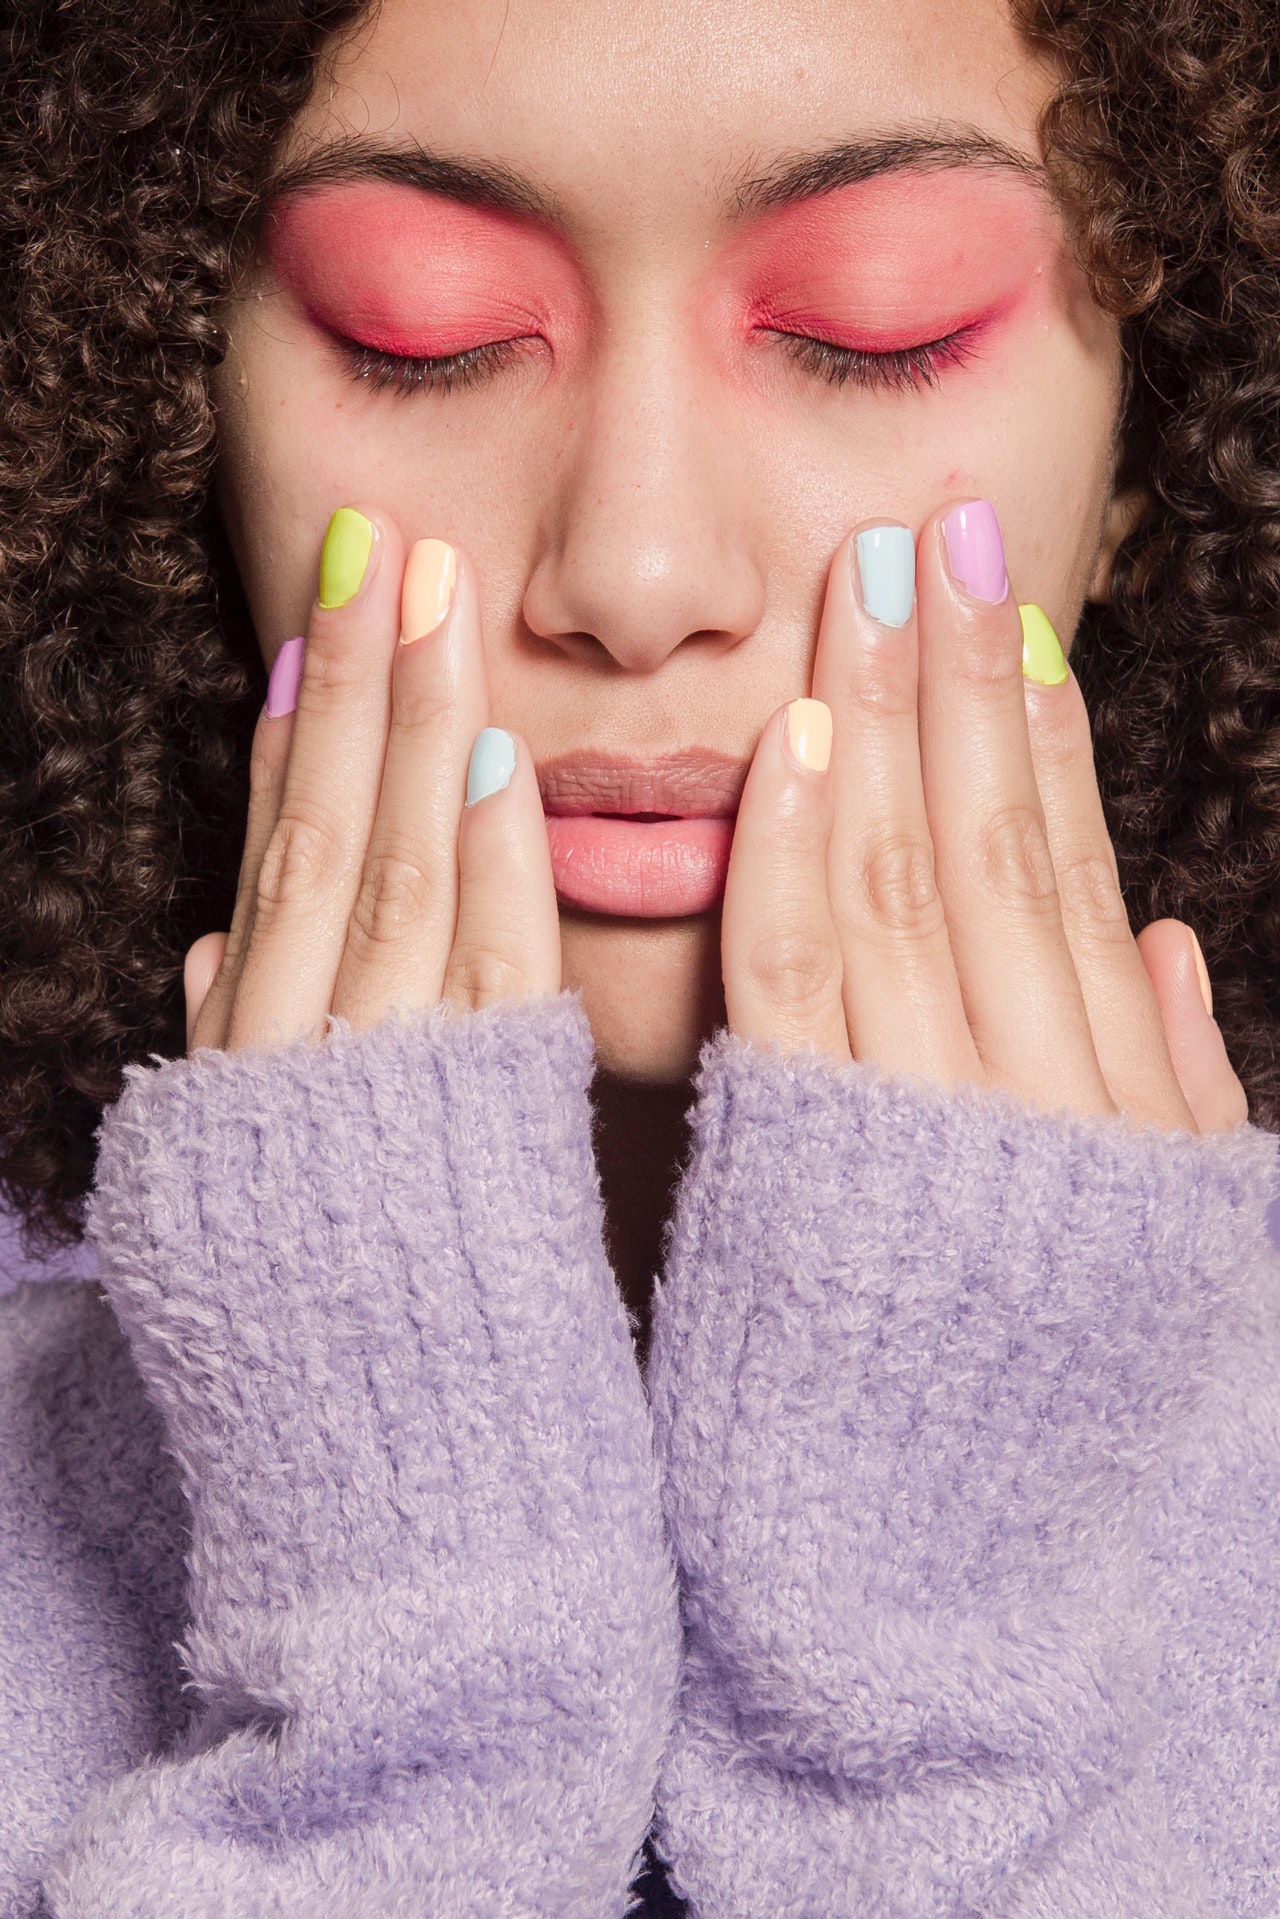 A woman with brown curly hair, closed eyes and pink eyeshadow. She's holding her hands up to her face and has different coloured pastel nail polish. She's wearing a lilac coloured woollen jumper.